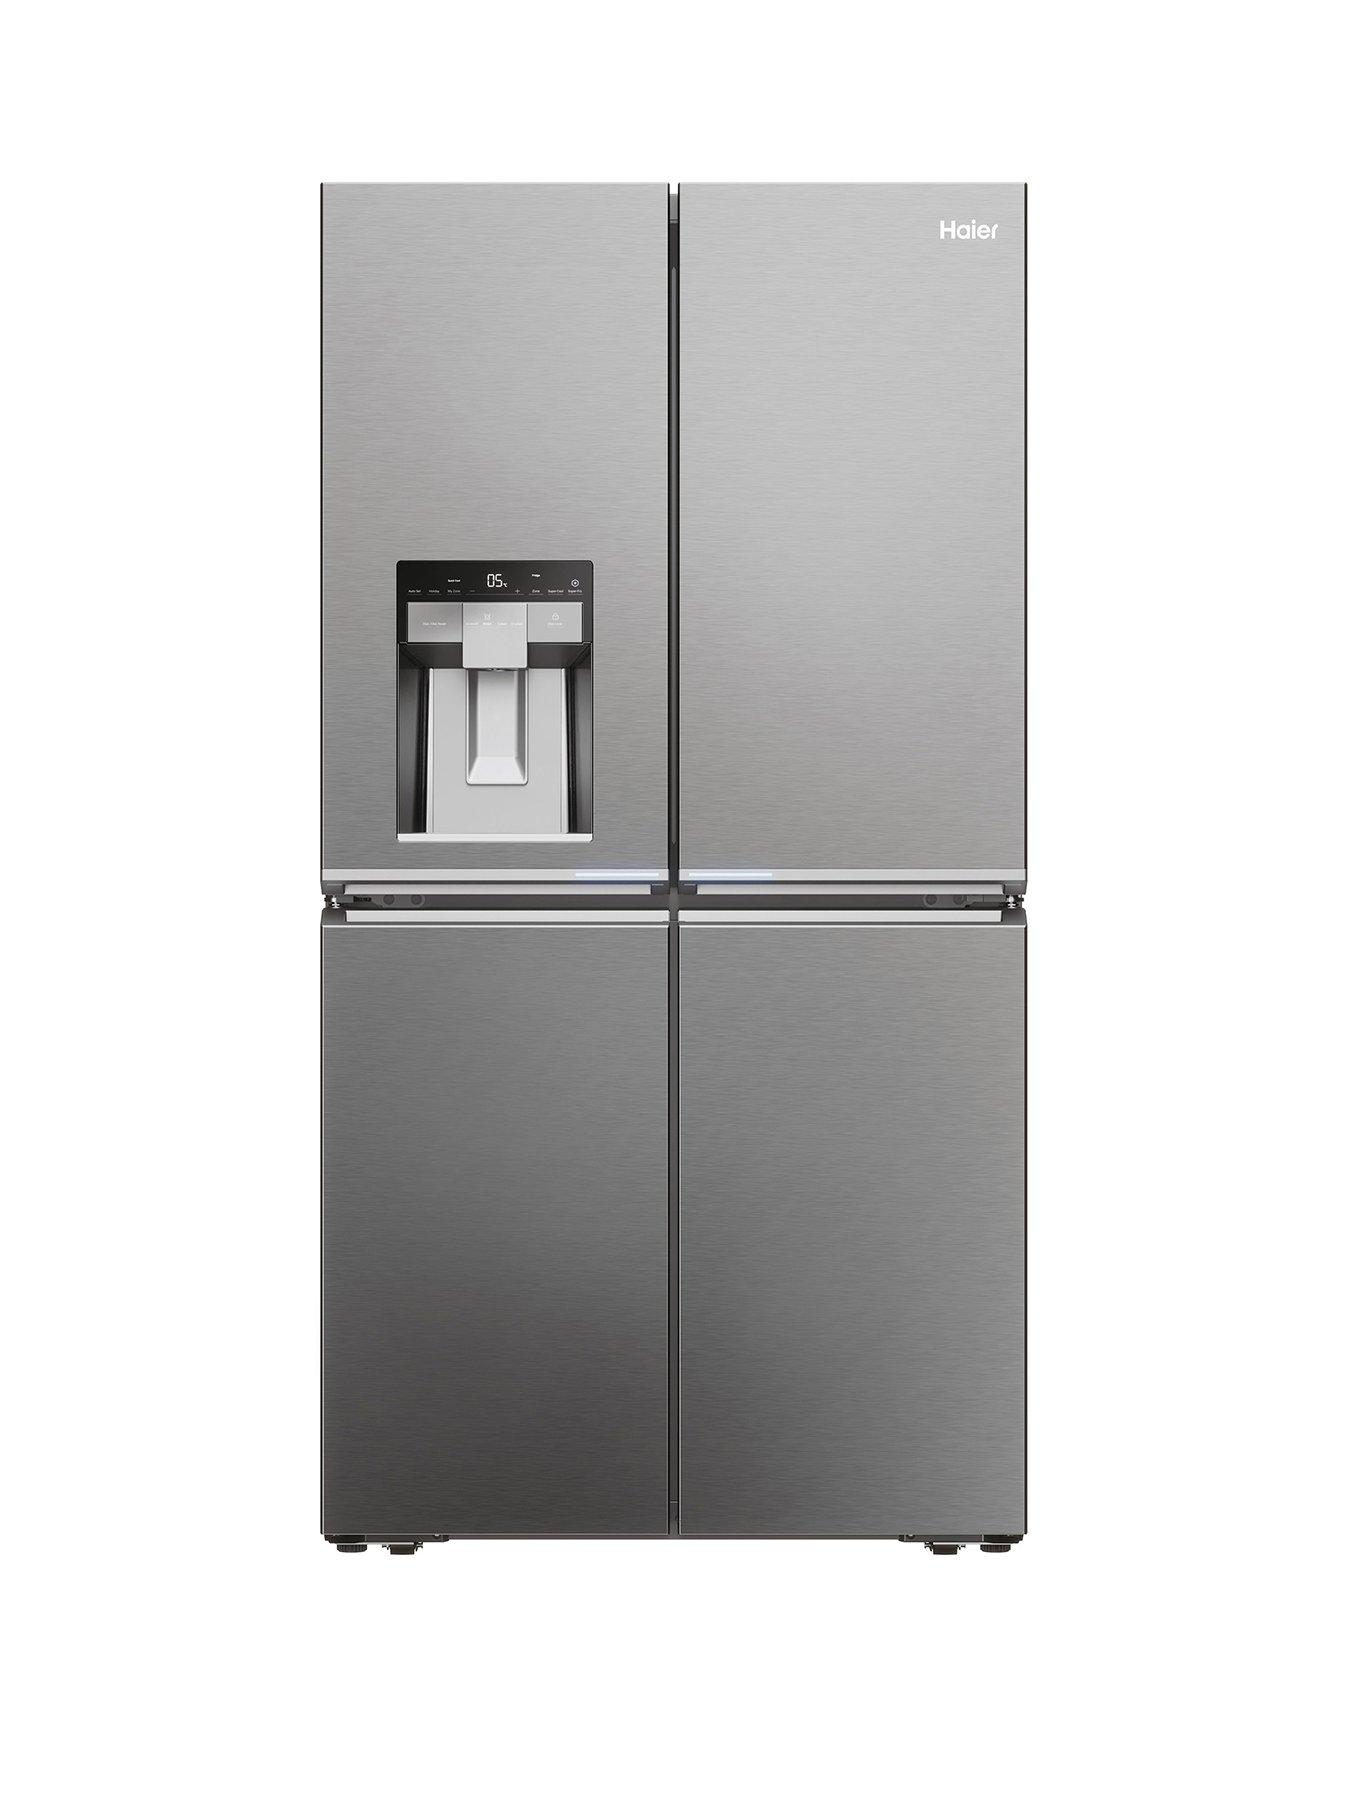 Haier Hcr7918Eimp Plumbed Total No Frost American Fridge Freezer With Water Dispenser, E Rated - Platinum Inox